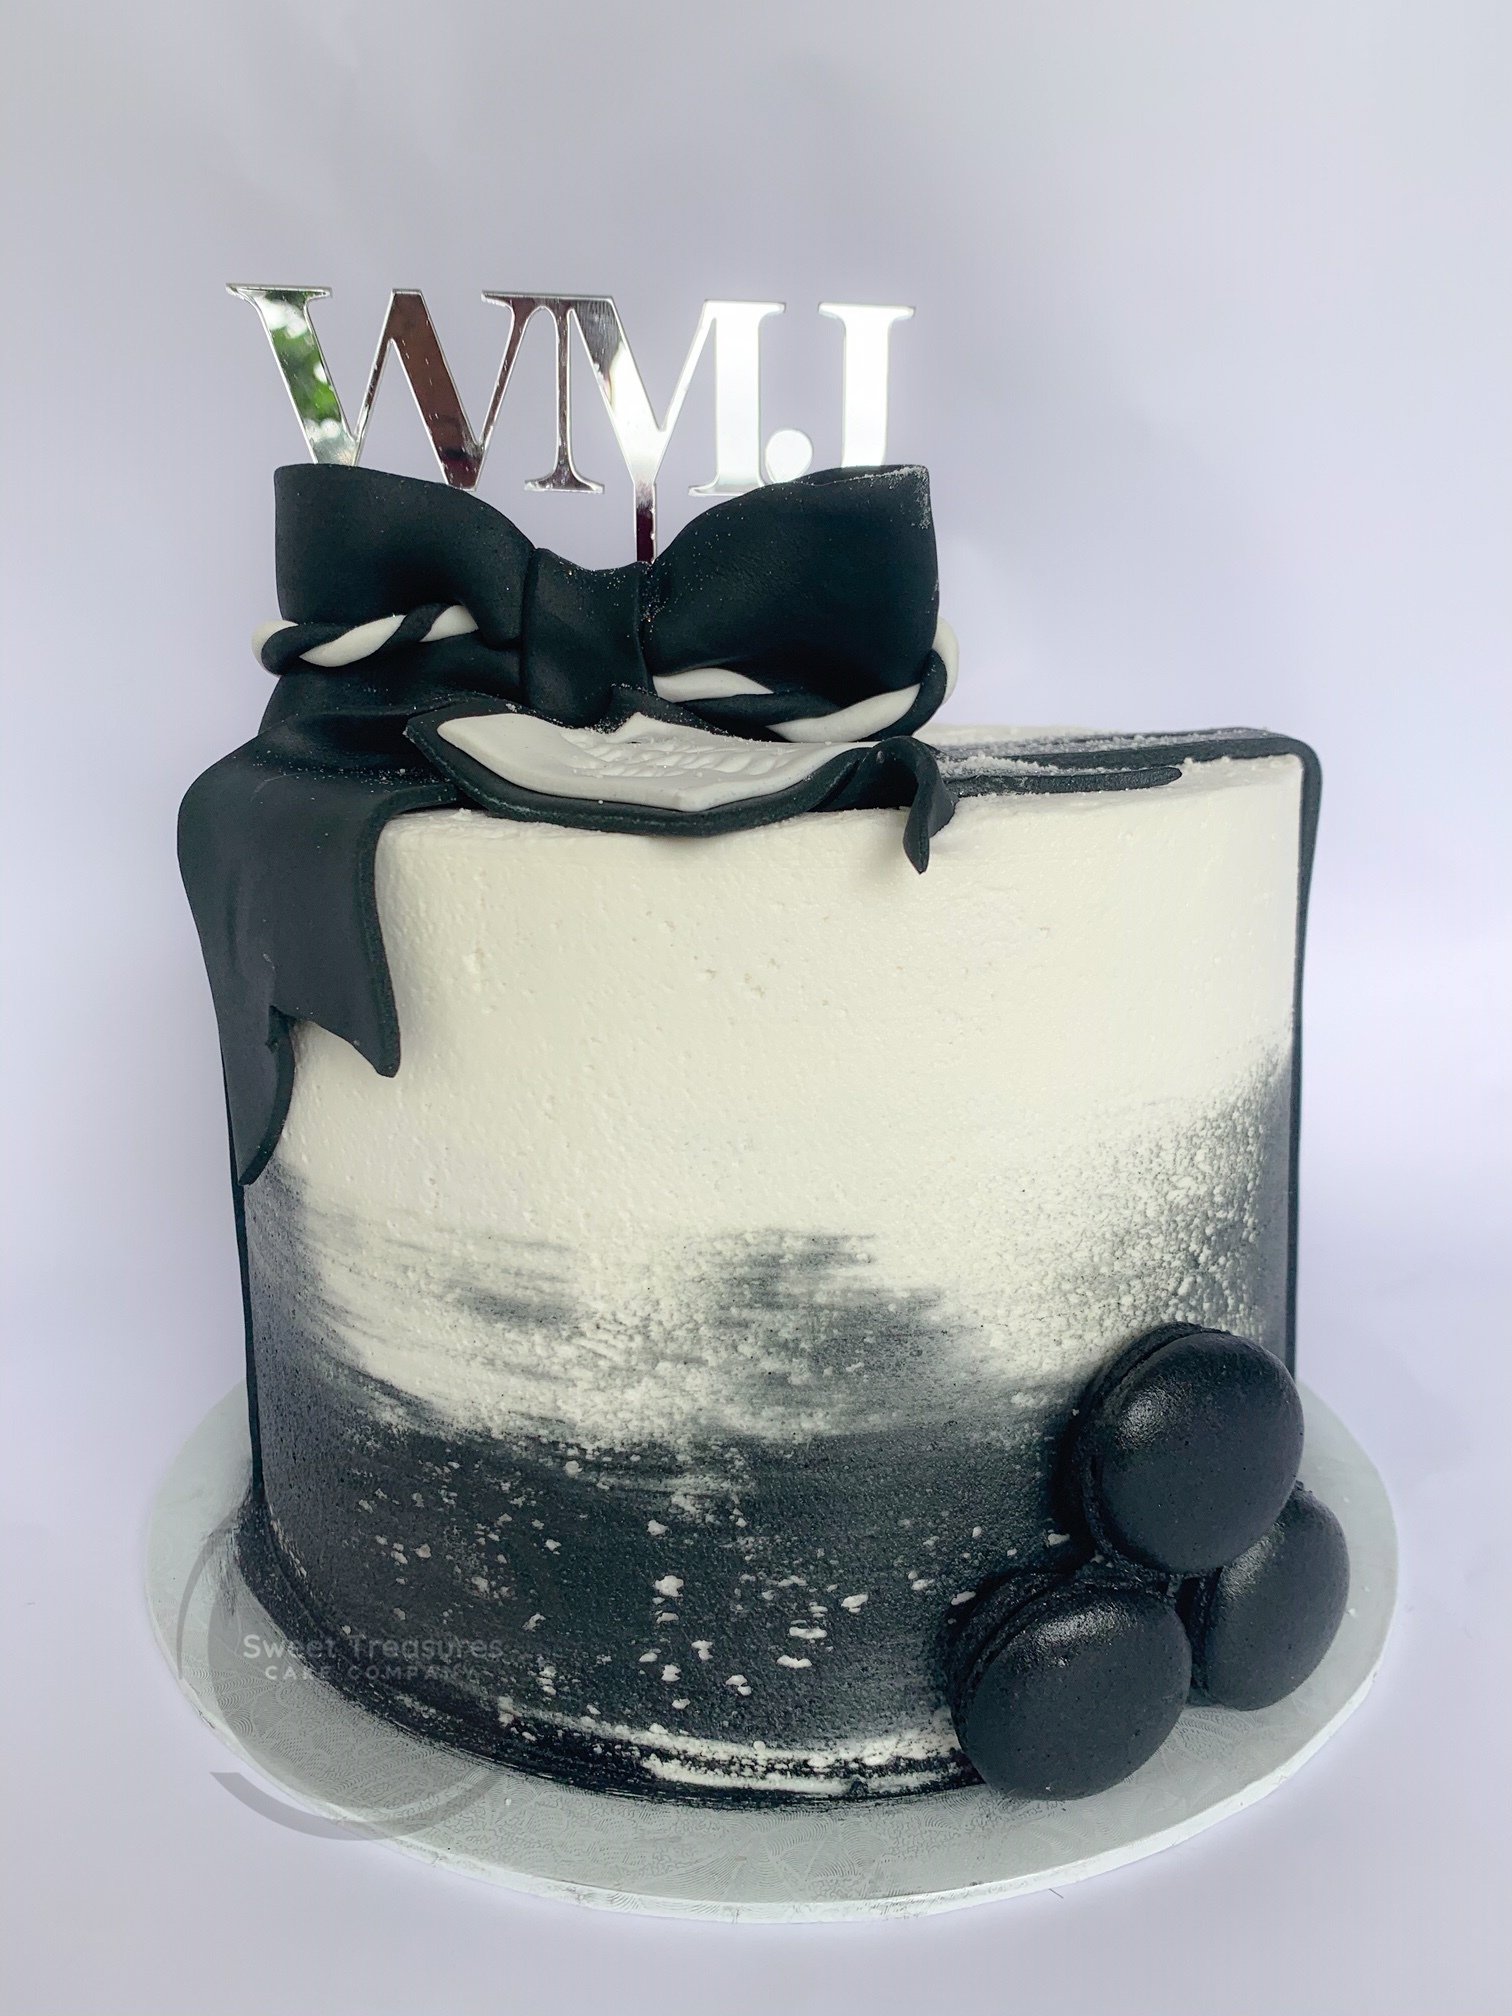 Black and White Two Tier Wedding Cake - Sweet Creations by Stacy LLC